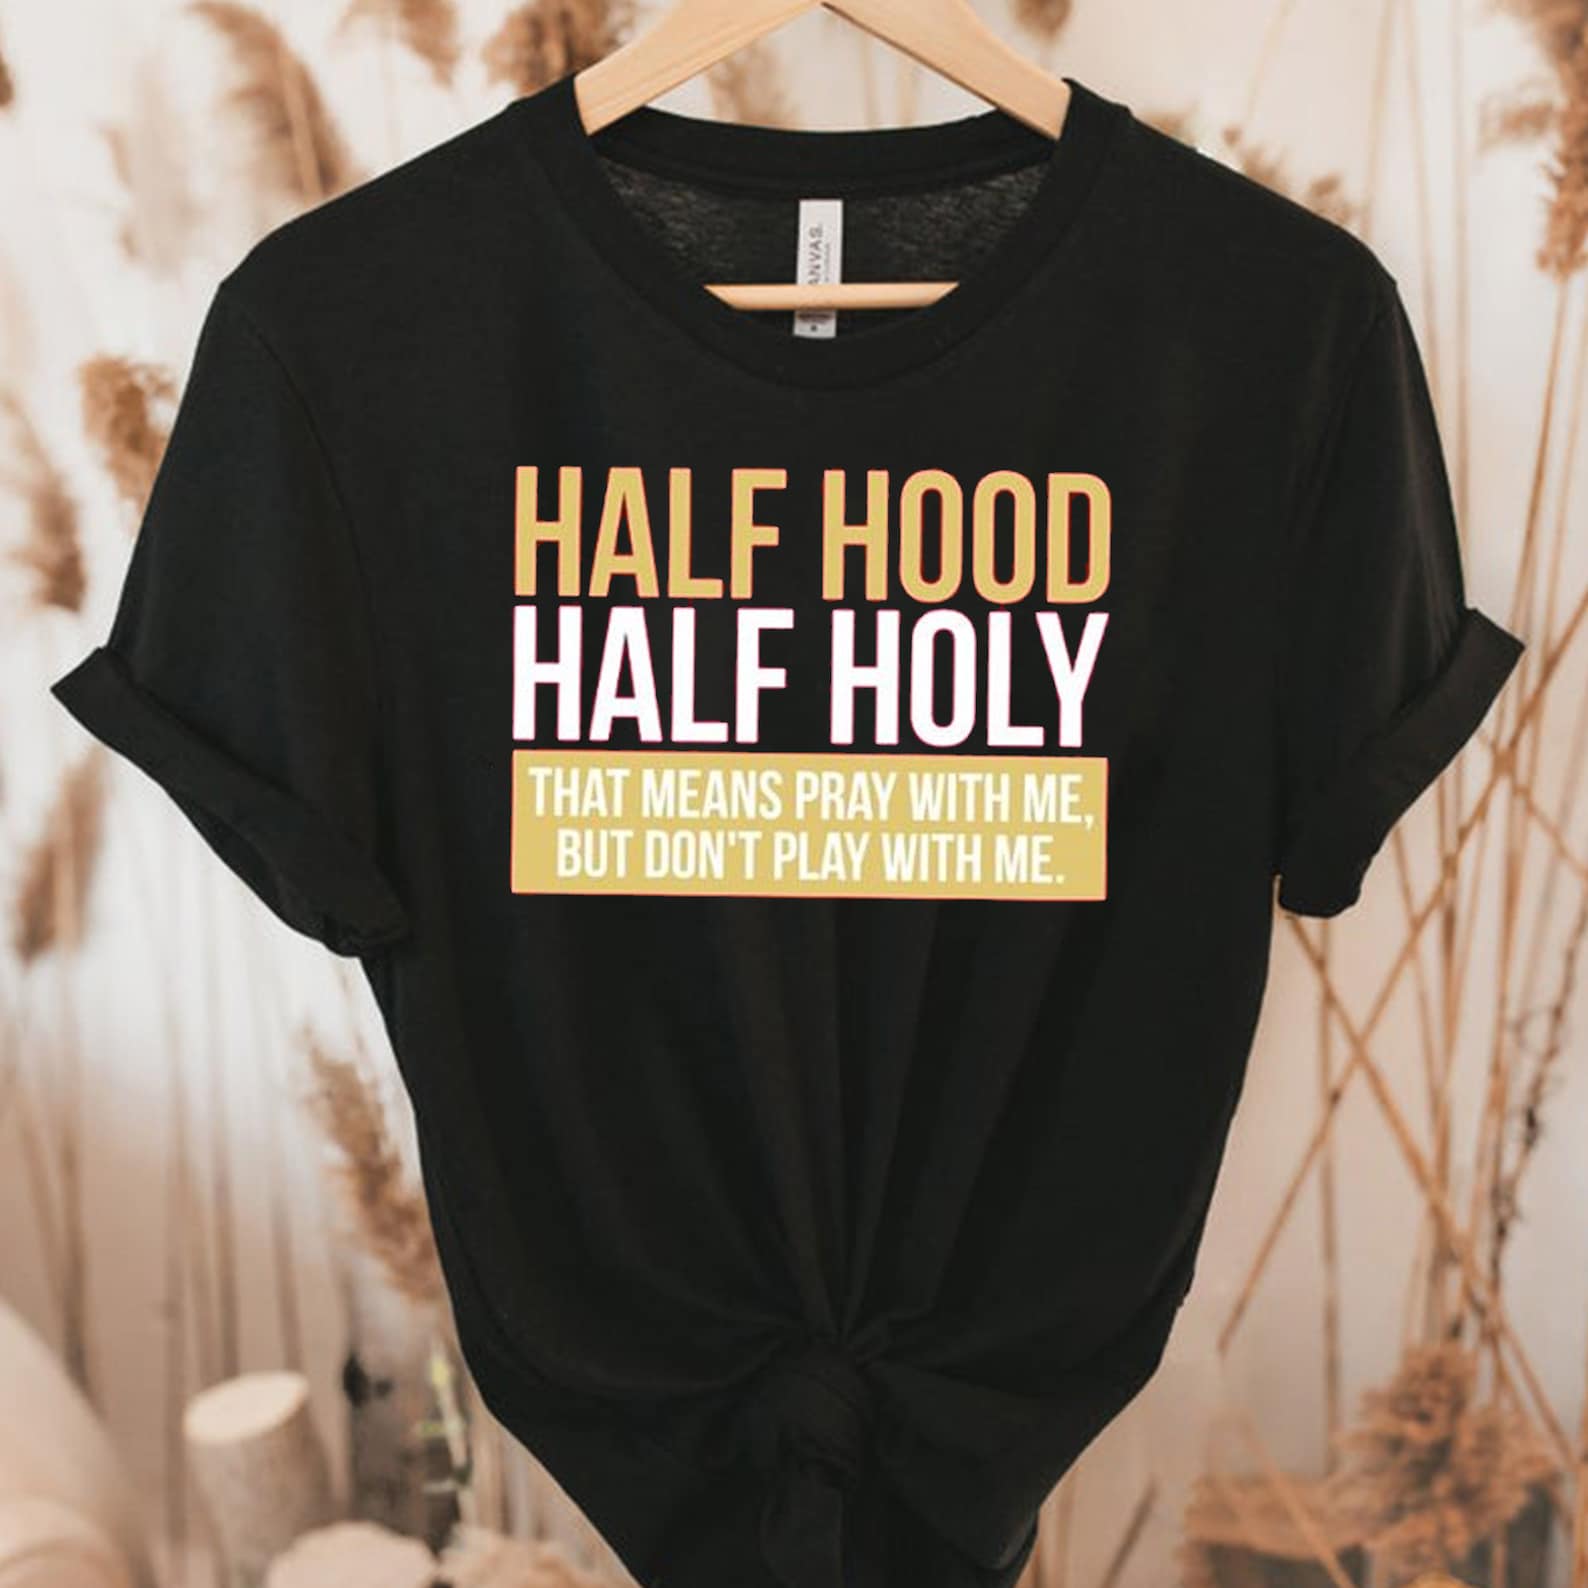 Half Hood Half Holy Shirt That Means Pray With Me | Etsy